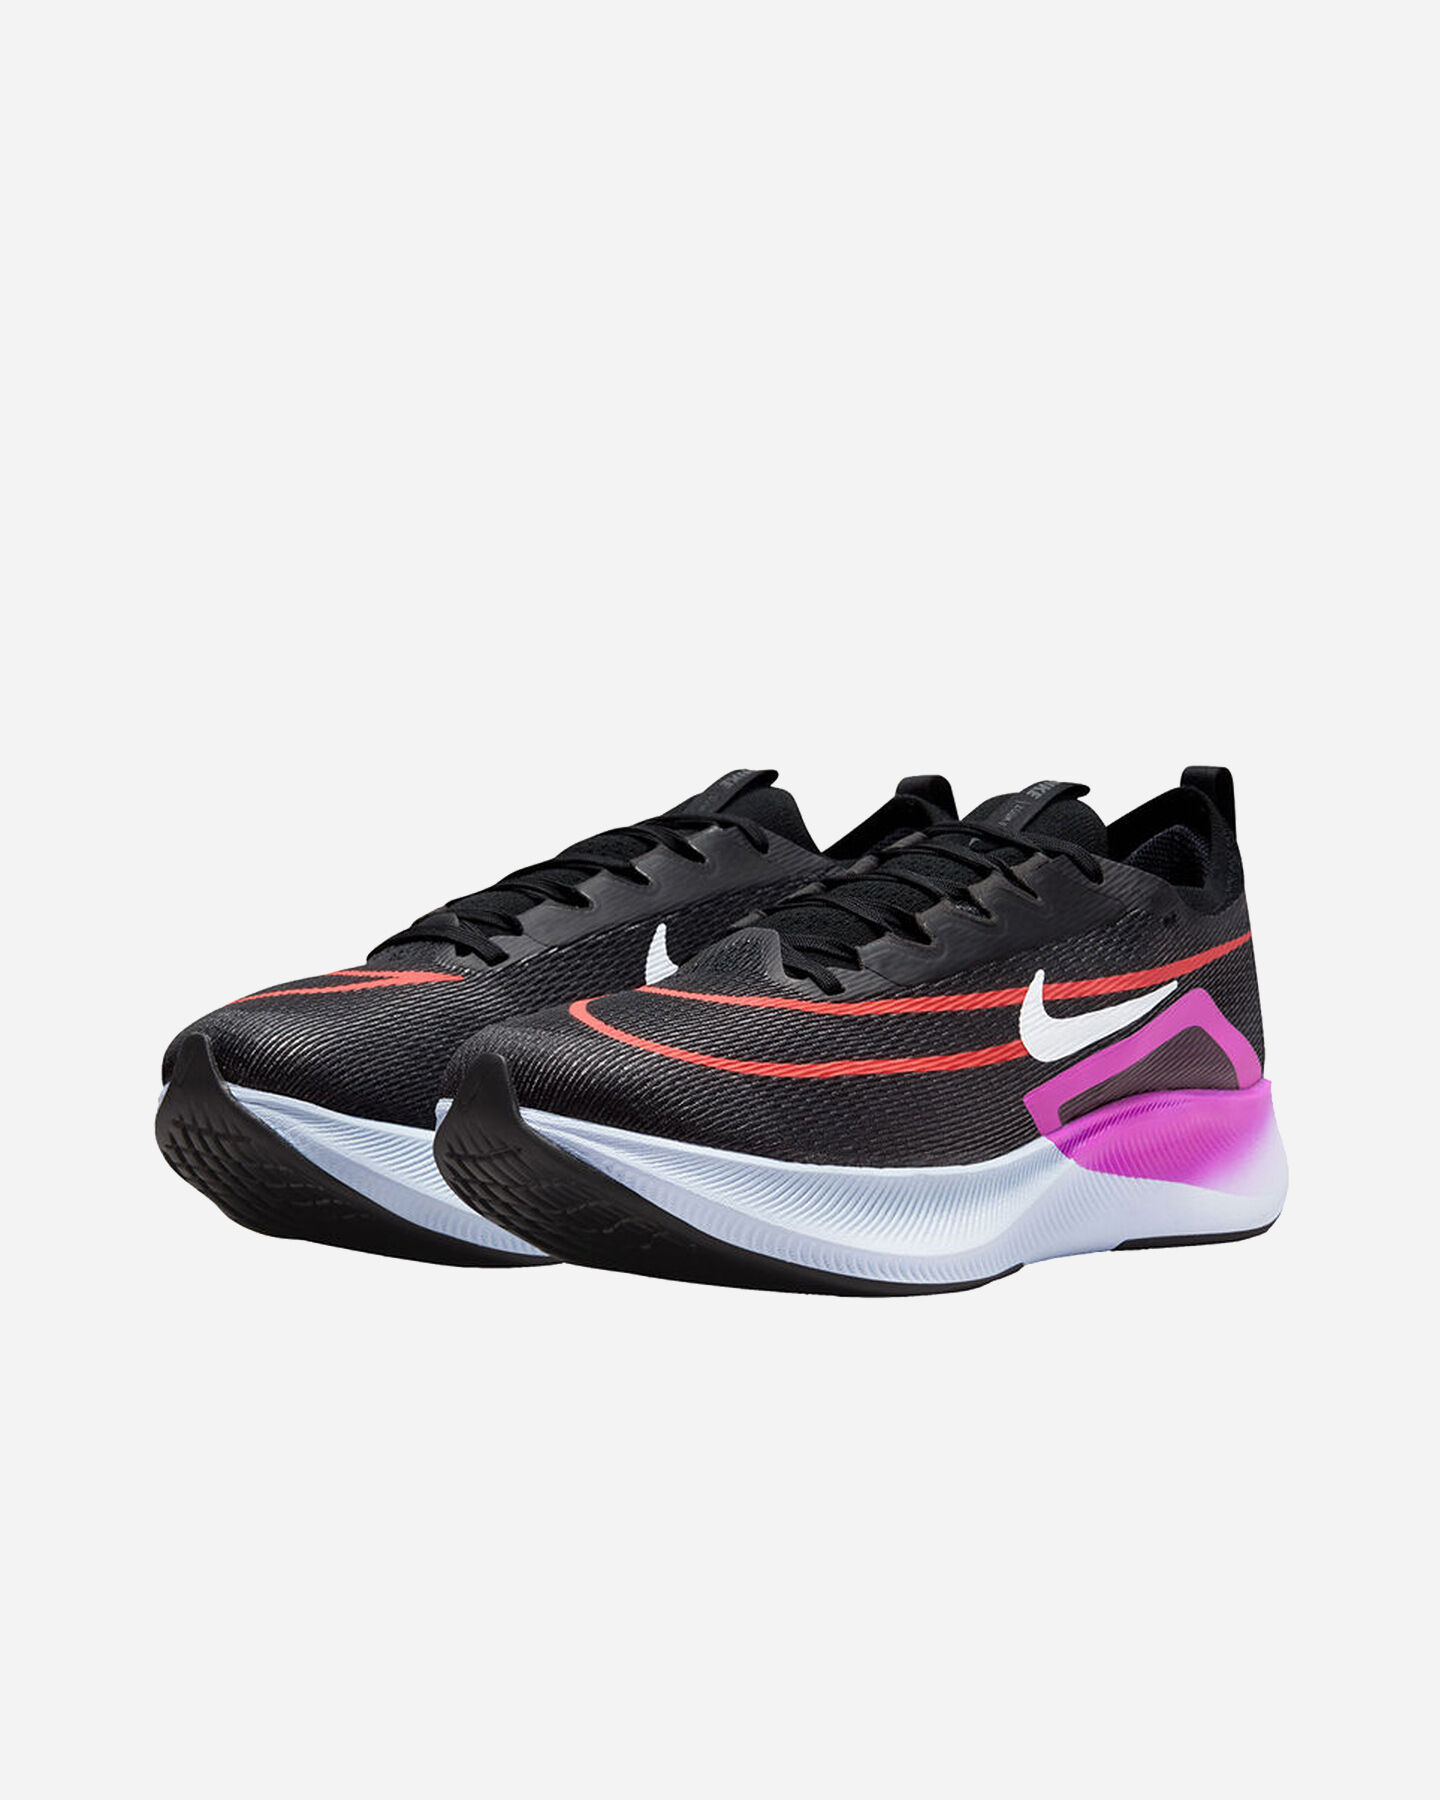  Scarpe running NIKE ZOOM FLY 4 M S5372657|004|6 scatto 1